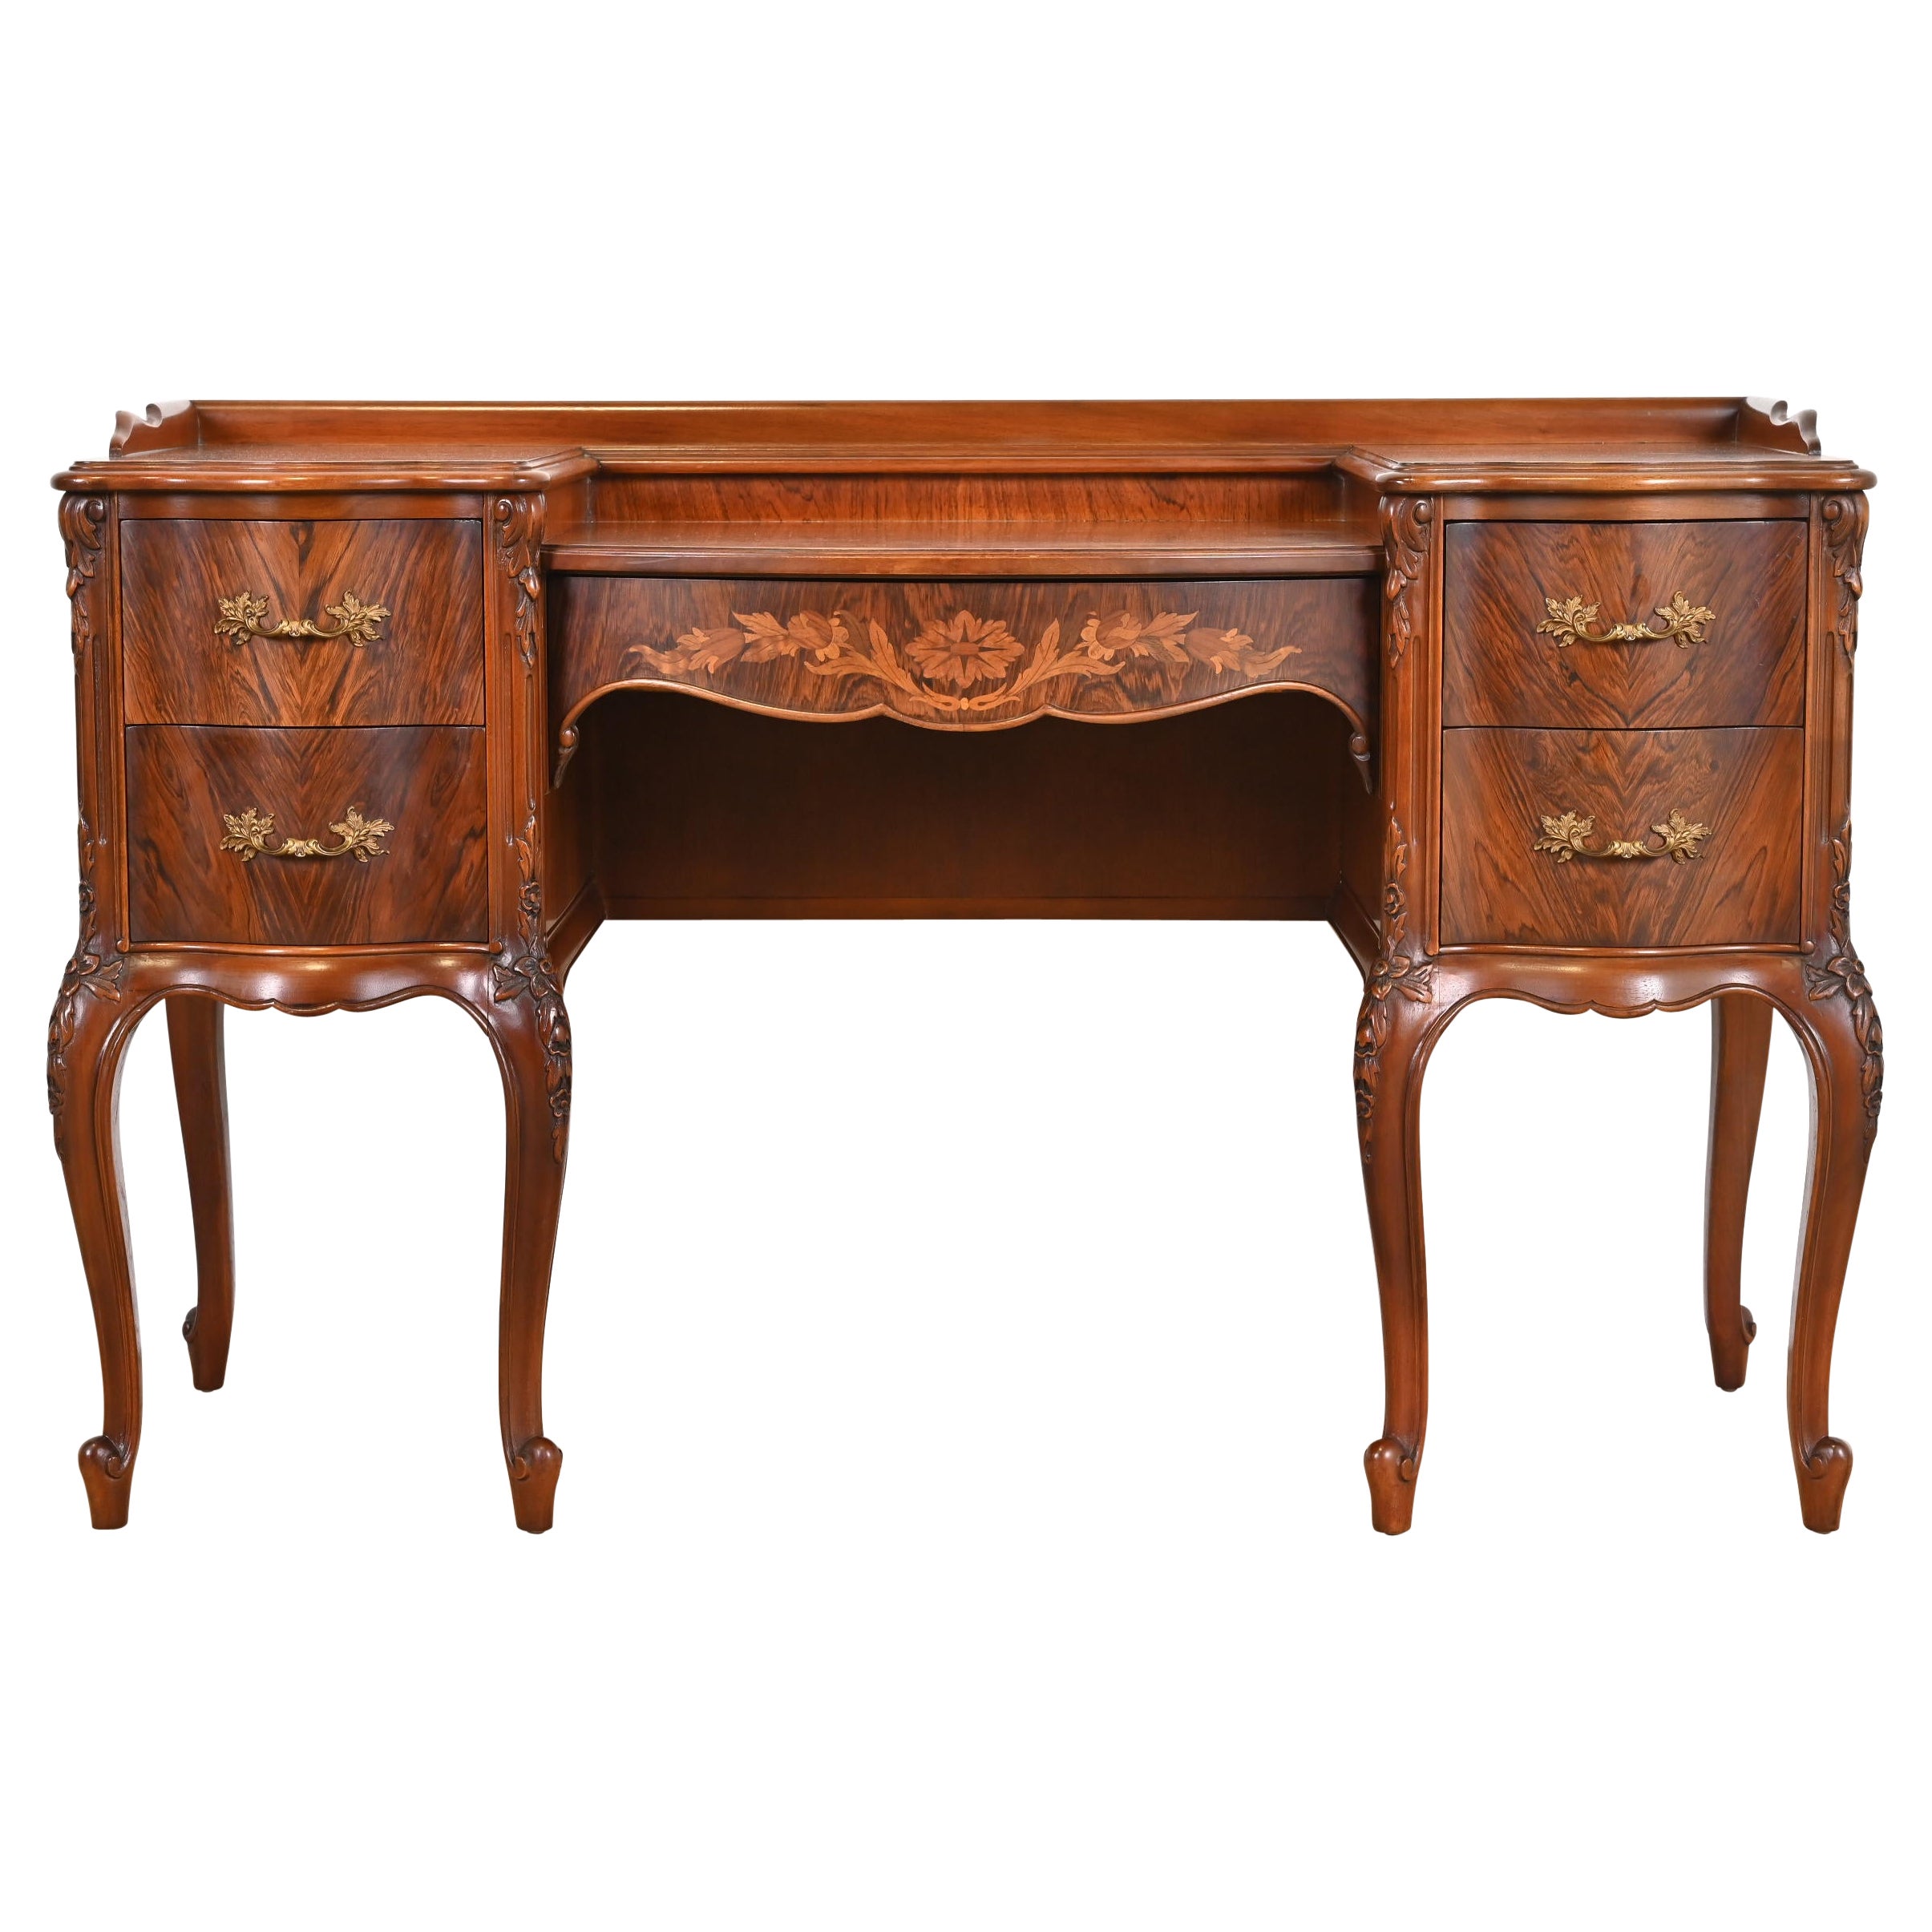 Limbert French Provincial Louis XV Carved Rosewood Vanity, 1920s